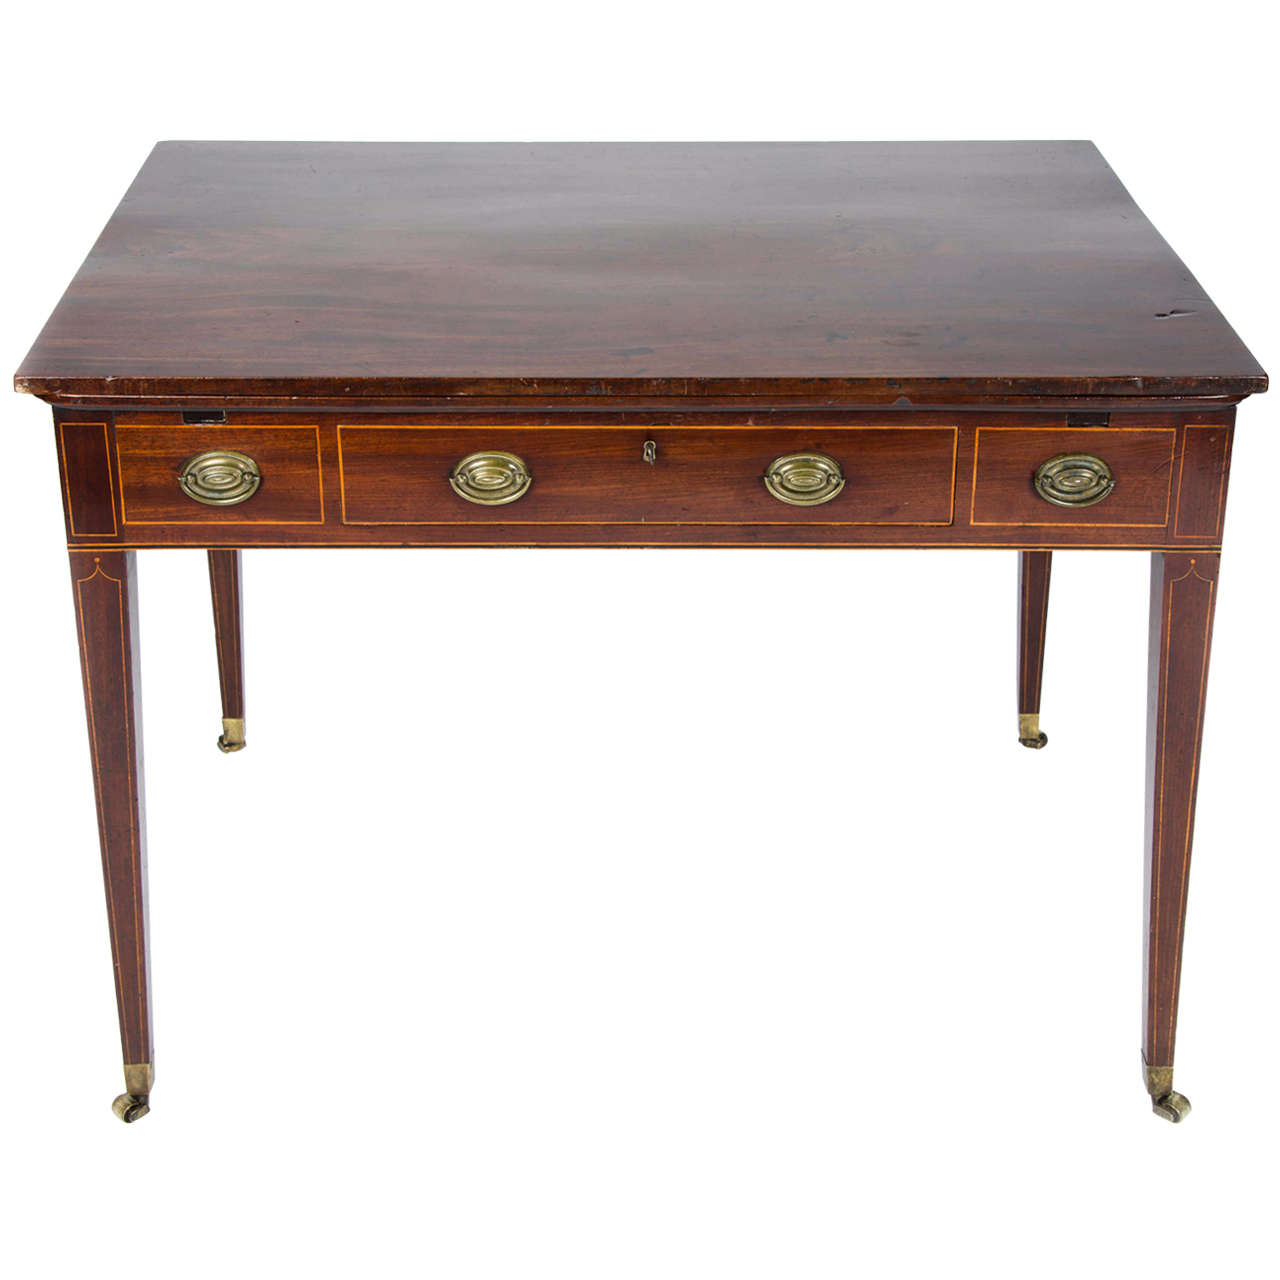 Late 18th Century Mahogany Draw Leaf Table to a Design by Thomas Sheraton For Sale